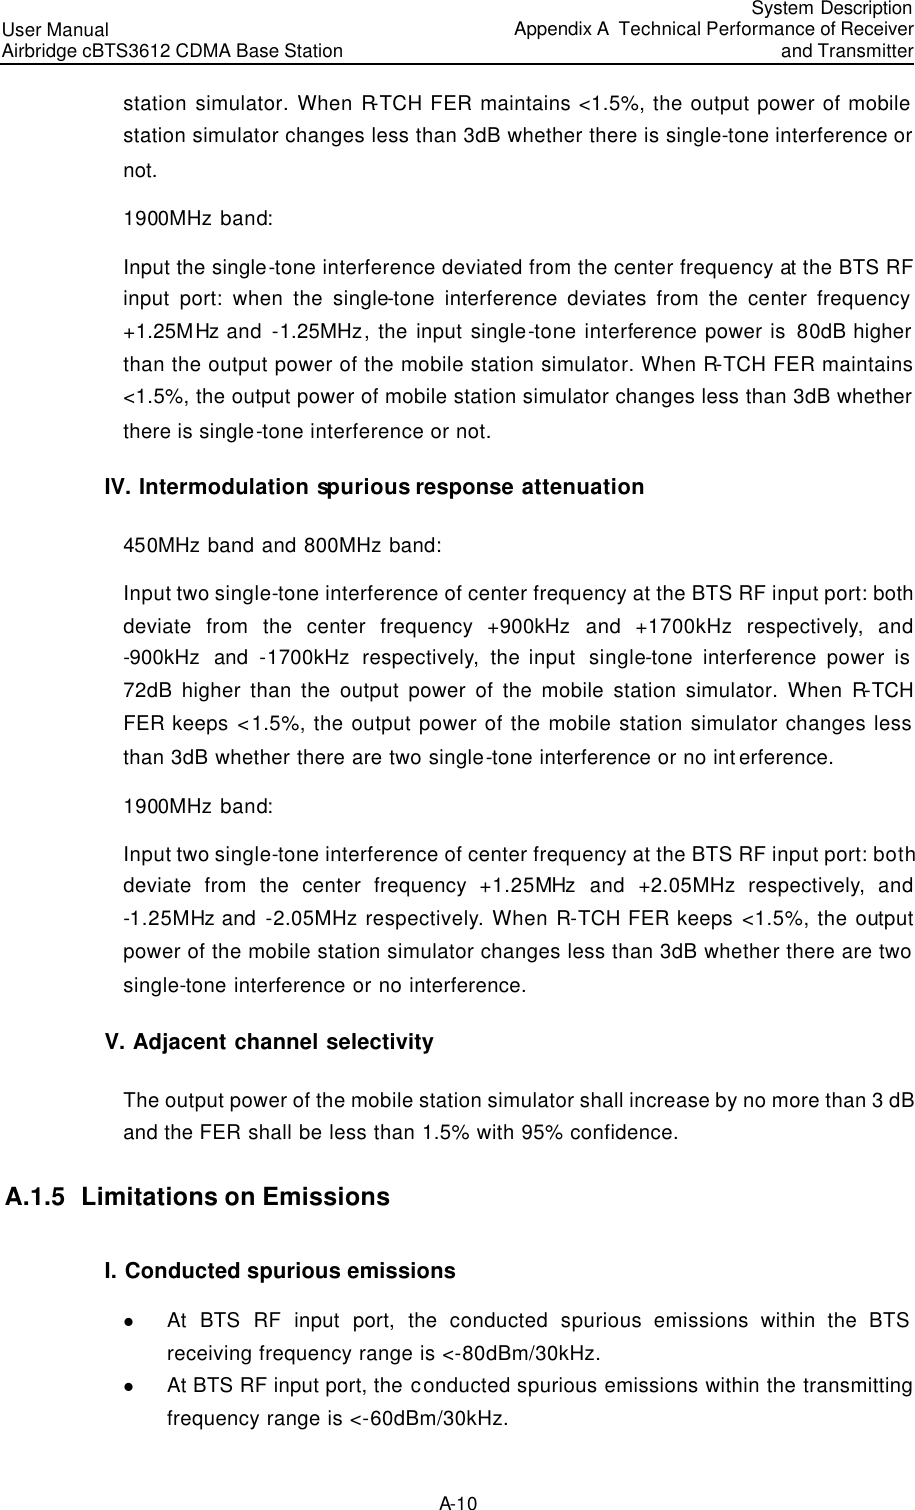 User Manual Airbridge cBTS3612 CDMA Base Station  System DescriptionAppendix A  Technical Performance of Receiver and Transmitter A-10 station simulator. When R-TCH FER maintains &lt;1.5%, the output power of mobile station simulator changes less than 3dB whether there is single-tone interference or not.  1900MHz band: Input the single-tone interference deviated from the center frequency at the BTS RF input port: when the single-tone interference deviates from the center frequency +1.25MHz and  -1.25MHz, the input single-tone interference power is 80dB higher than the output power of the mobile station simulator. When R-TCH FER maintains &lt;1.5%, the output power of mobile station simulator changes less than 3dB whether there is single-tone interference or not.  IV. Intermodulation spurious response attenuation 450MHz band and 800MHz band: Input two single-tone interference of center frequency at the BTS RF input port: both deviate from the center frequency +900kHz and +1700kHz respectively,  and -900kHz and -1700kHz  respectively,  the input  single-tone interference power is 72dB higher than the output power of the mobile station simulator. When R-TCH FER keeps &lt;1.5%, the output power of the mobile station simulator changes less than 3dB whether there are two single-tone interference or no interference.  1900MHz band: Input two single-tone interference of center frequency at the BTS RF input port: both deviate from the center frequency +1.25MHz and +2.05MHz respectively,  and -1.25MHz and -2.05MHz respectively. When R-TCH FER keeps &lt;1.5%, the output power of the mobile station simulator changes less than 3dB whether there are two single-tone interference or no interference.  V. Adjacent channel selectivity The output power of the mobile station simulator shall increase by no more than 3 dB and the FER shall be less than 1.5% with 95% confidence.  A.1.5  Limitations on Emissions I. Conducted spurious emissions  l At BTS RF input port, the conducted  spurious emissions within the BTS receiving frequency range is &lt;-80dBm/30kHz.  l At BTS RF input port, the conducted spurious emissions within the transmitting frequency range is &lt;-60dBm/30kHz.  